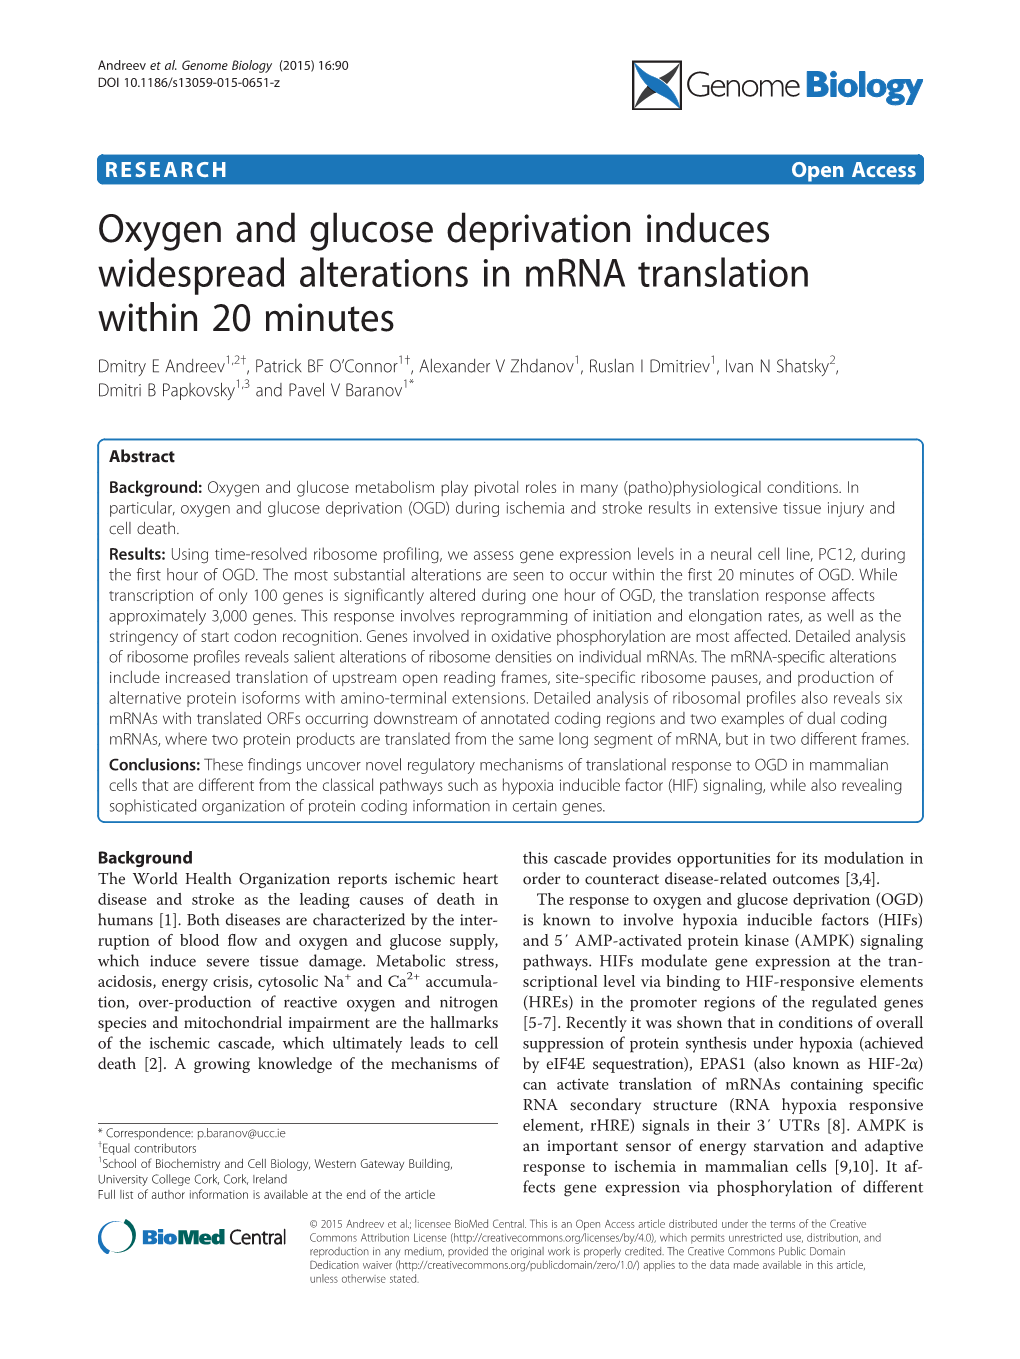 Oxygen and Glucose Deprivation Induces Widespread Alterations In